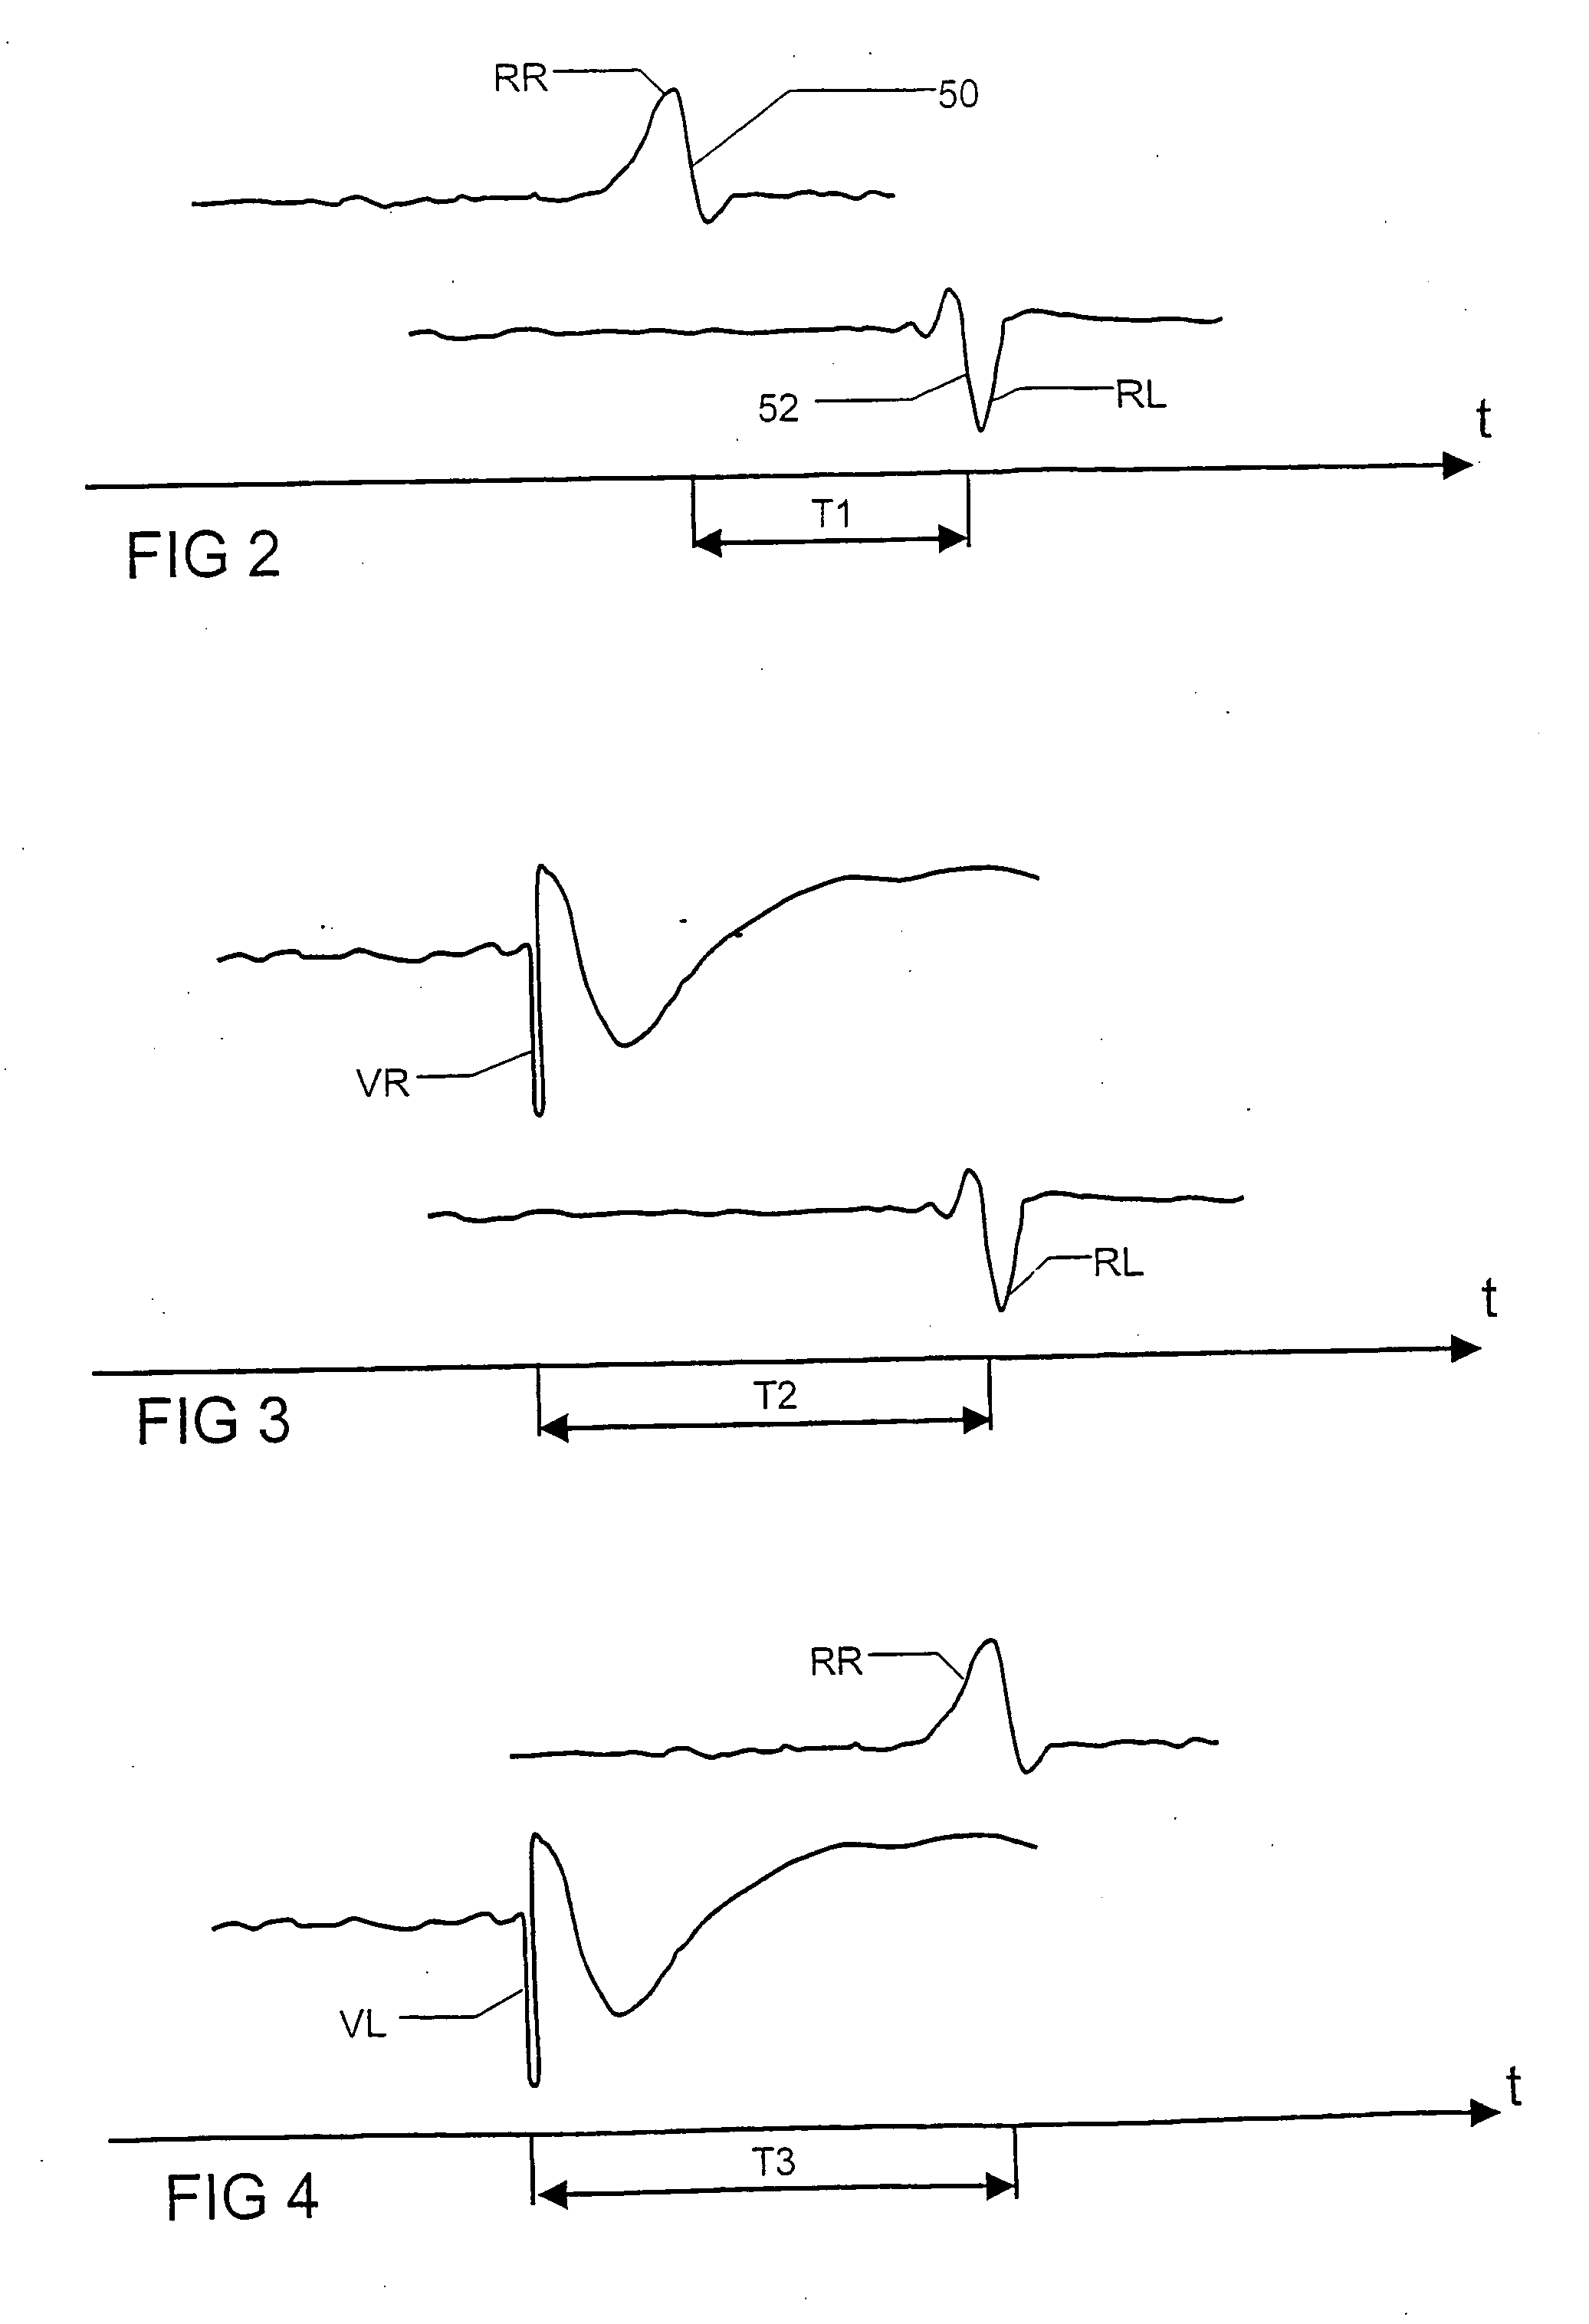 Heart monitoring and stimulating device, a system including such a device and use of the system